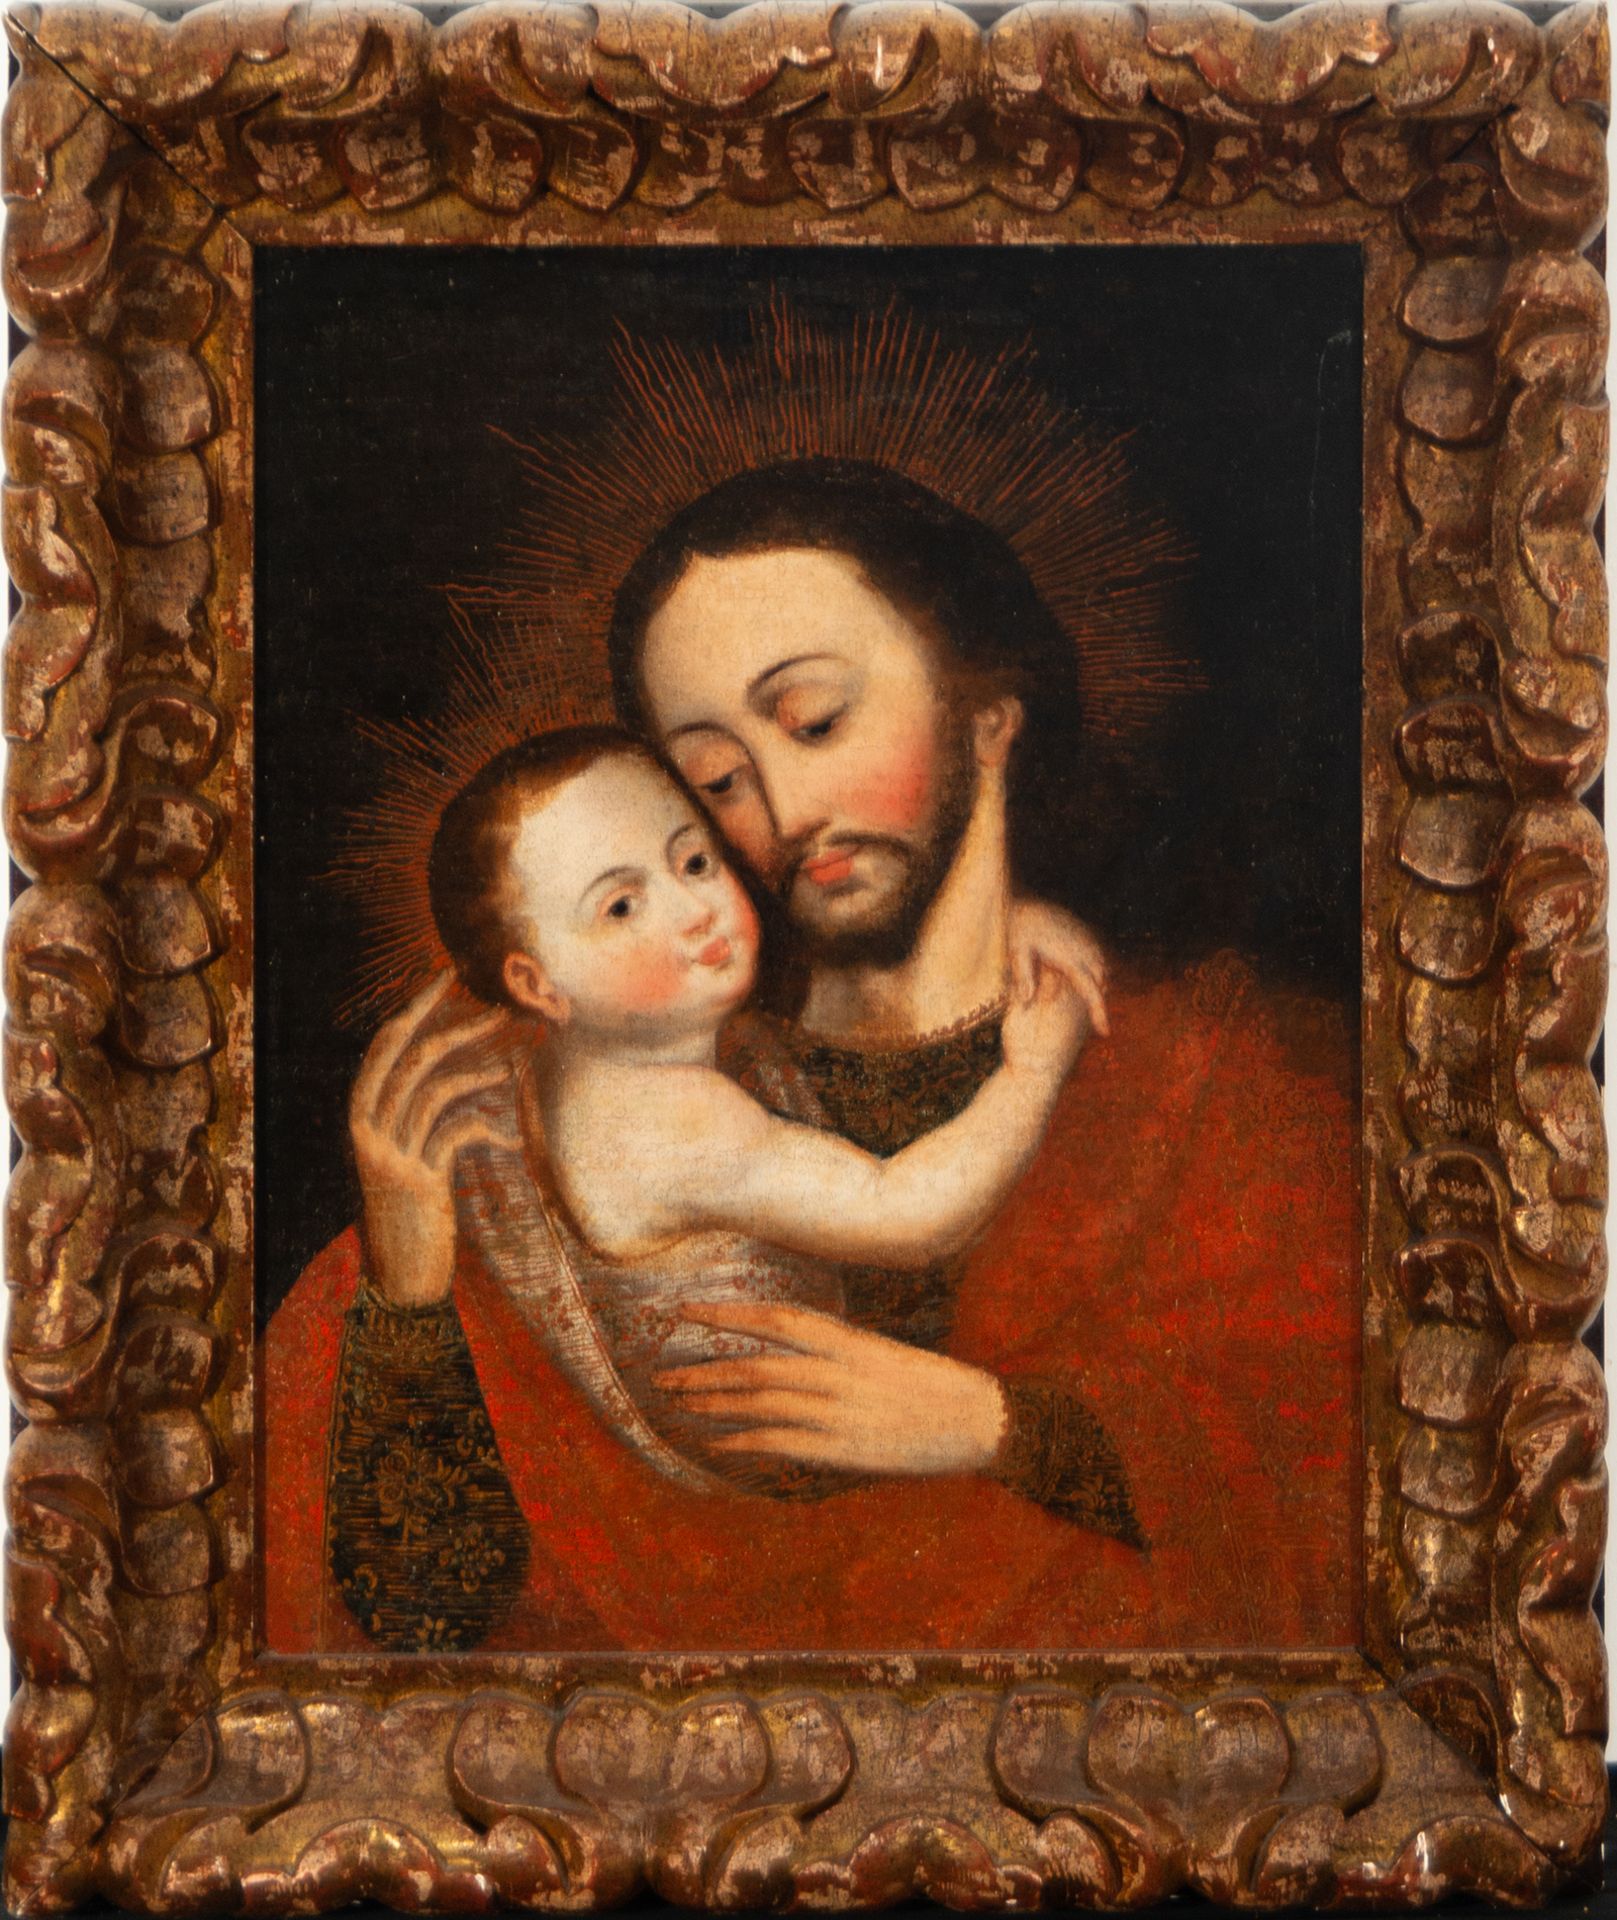 Saint Joseph with Child in Arms, Novohispanic colonial school from the 17th century